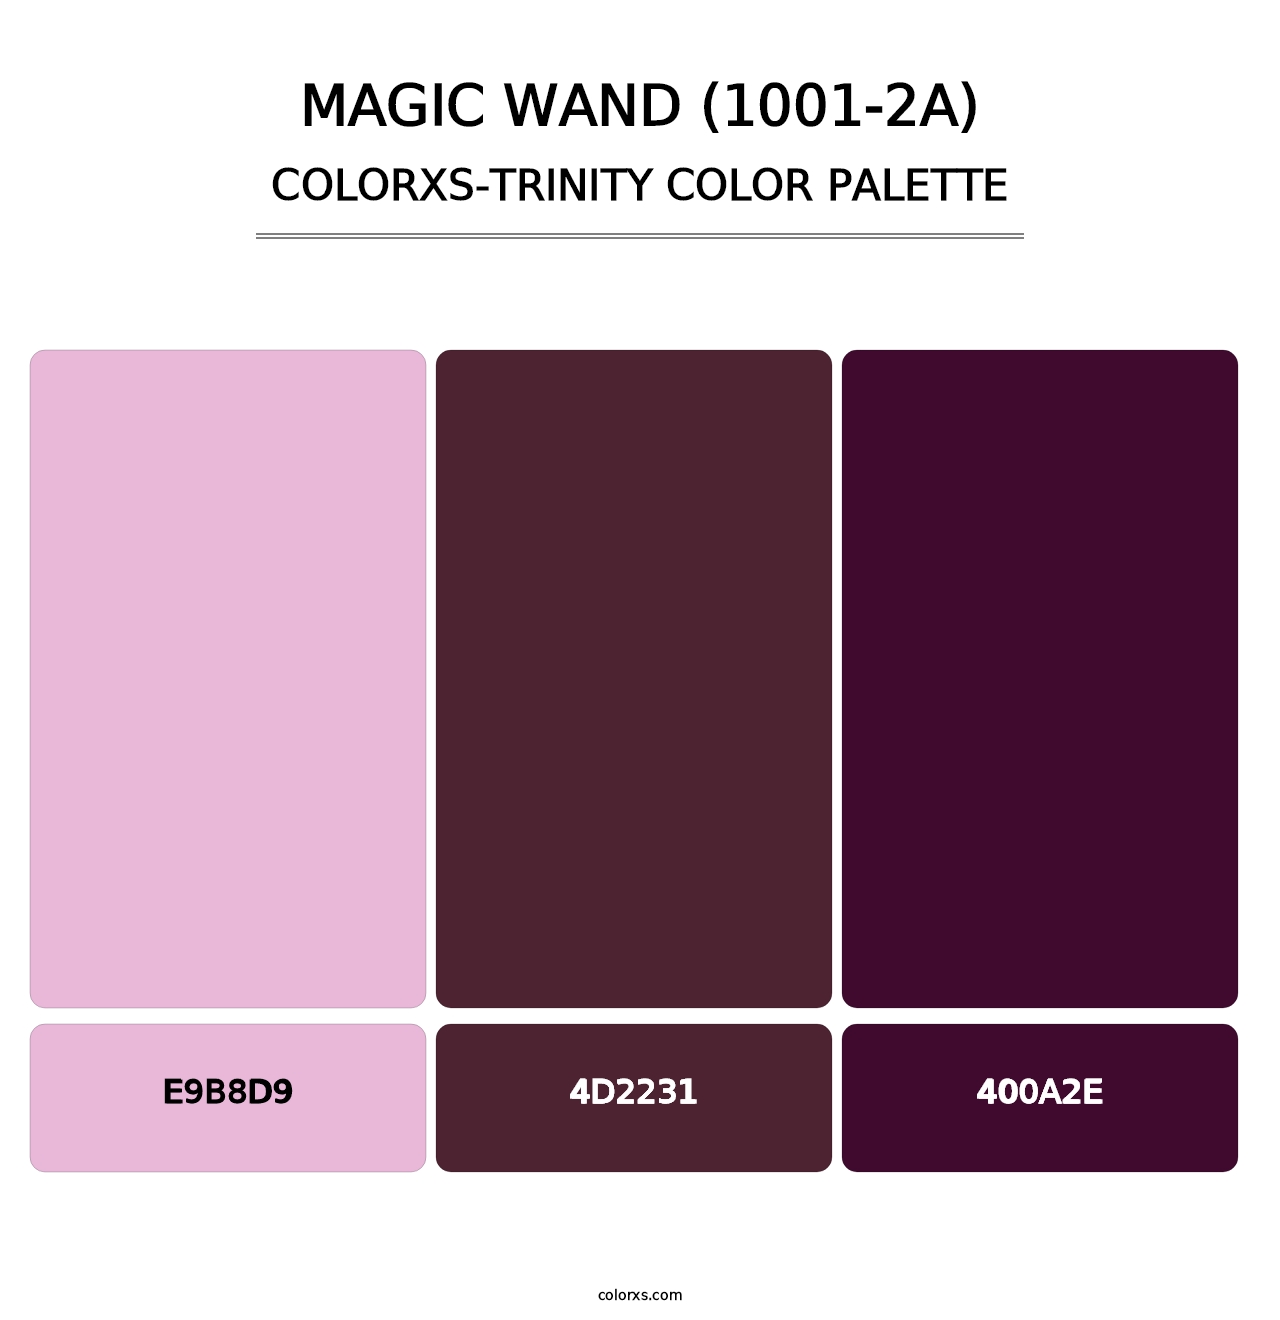 Magic Wand (1001-2A) - Colorxs Trinity Palette